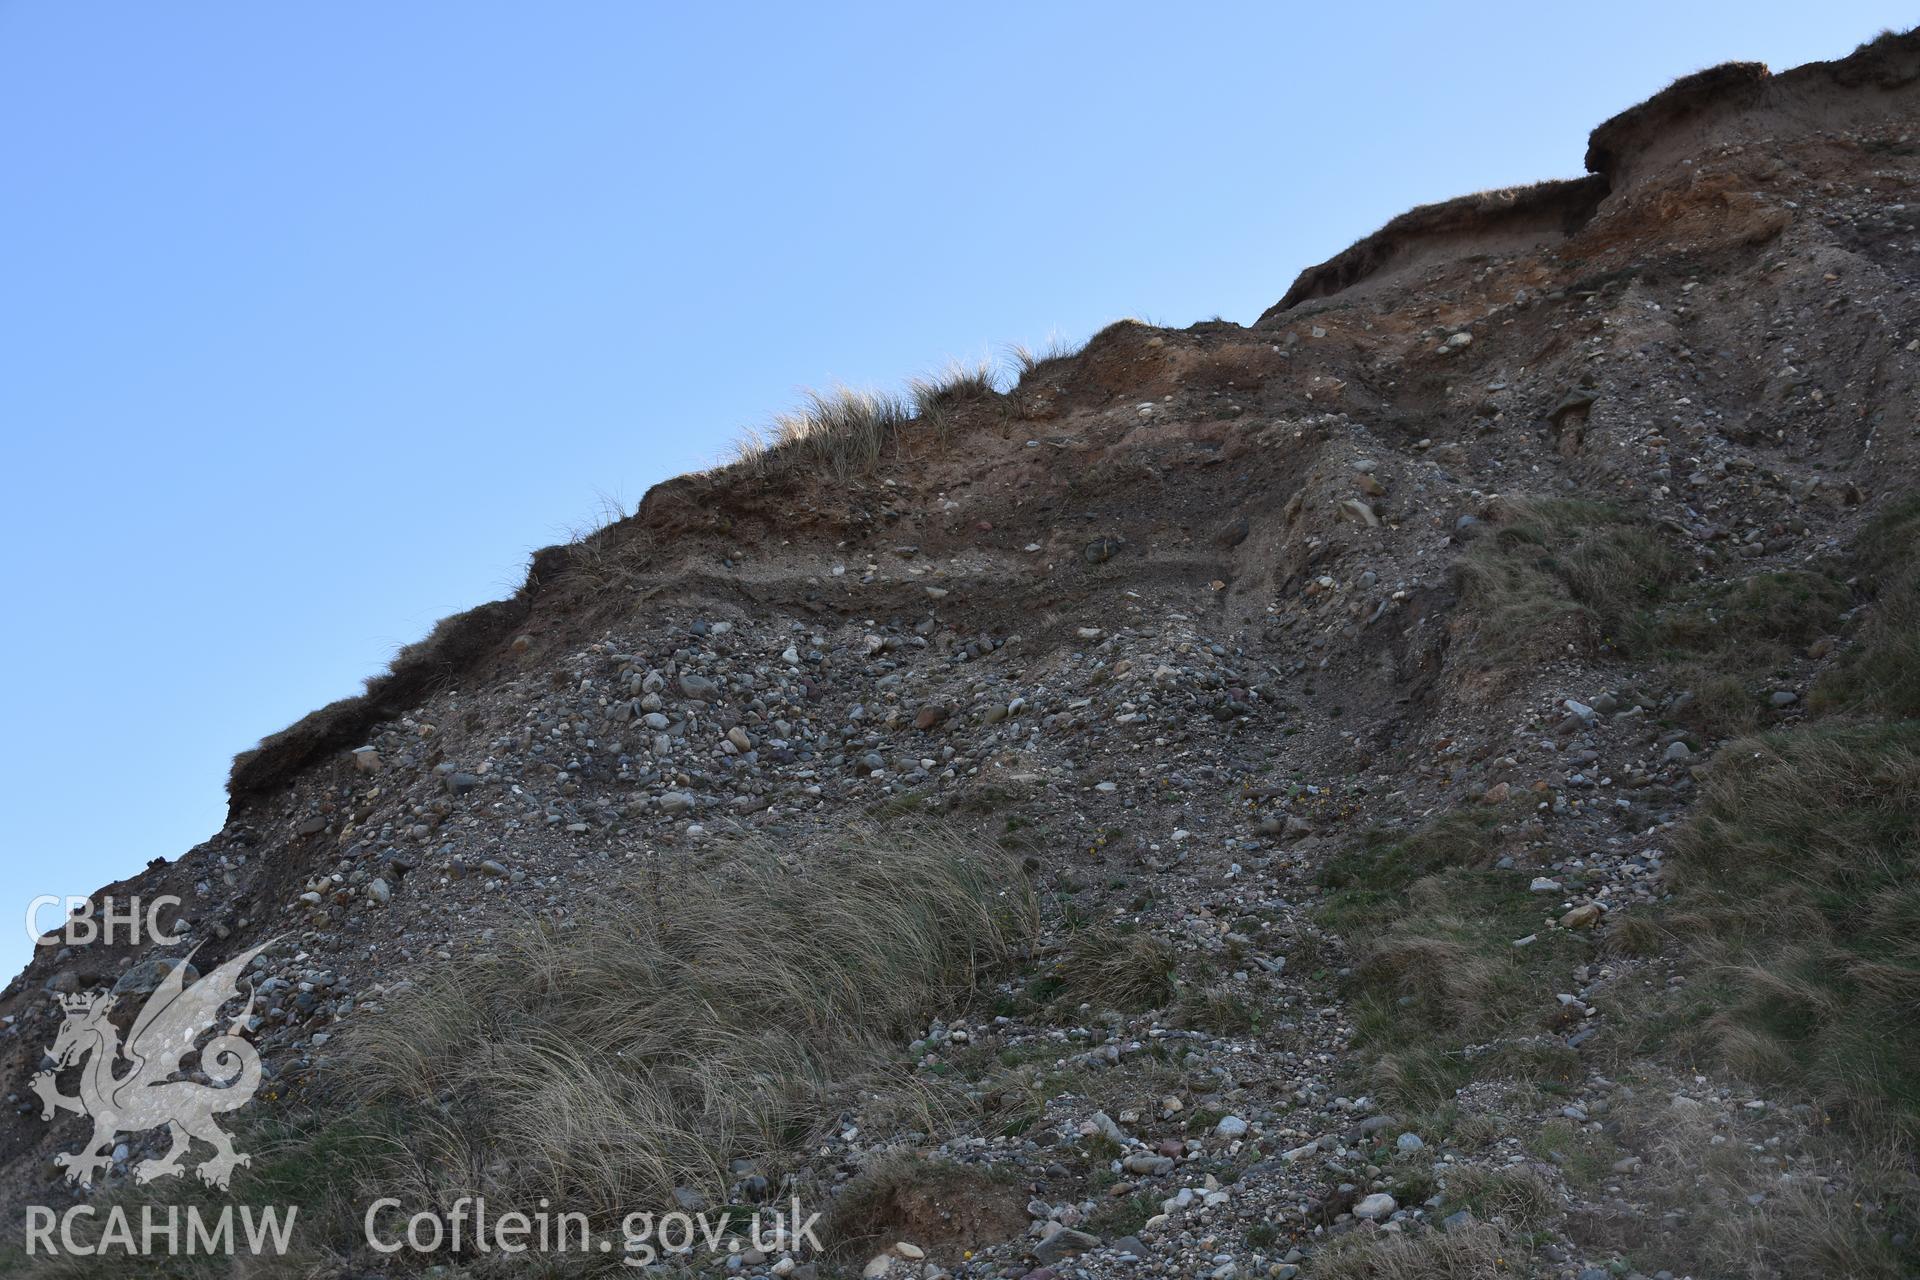 Close up shot of eroding cliff face from underneath. Grassy tufts and stratigraphy at the top visisble. Taken by Toby Driver. Produced with EU funds through the Ireland Wales Co-operation Programme 2014-2023. All material made freely available through the